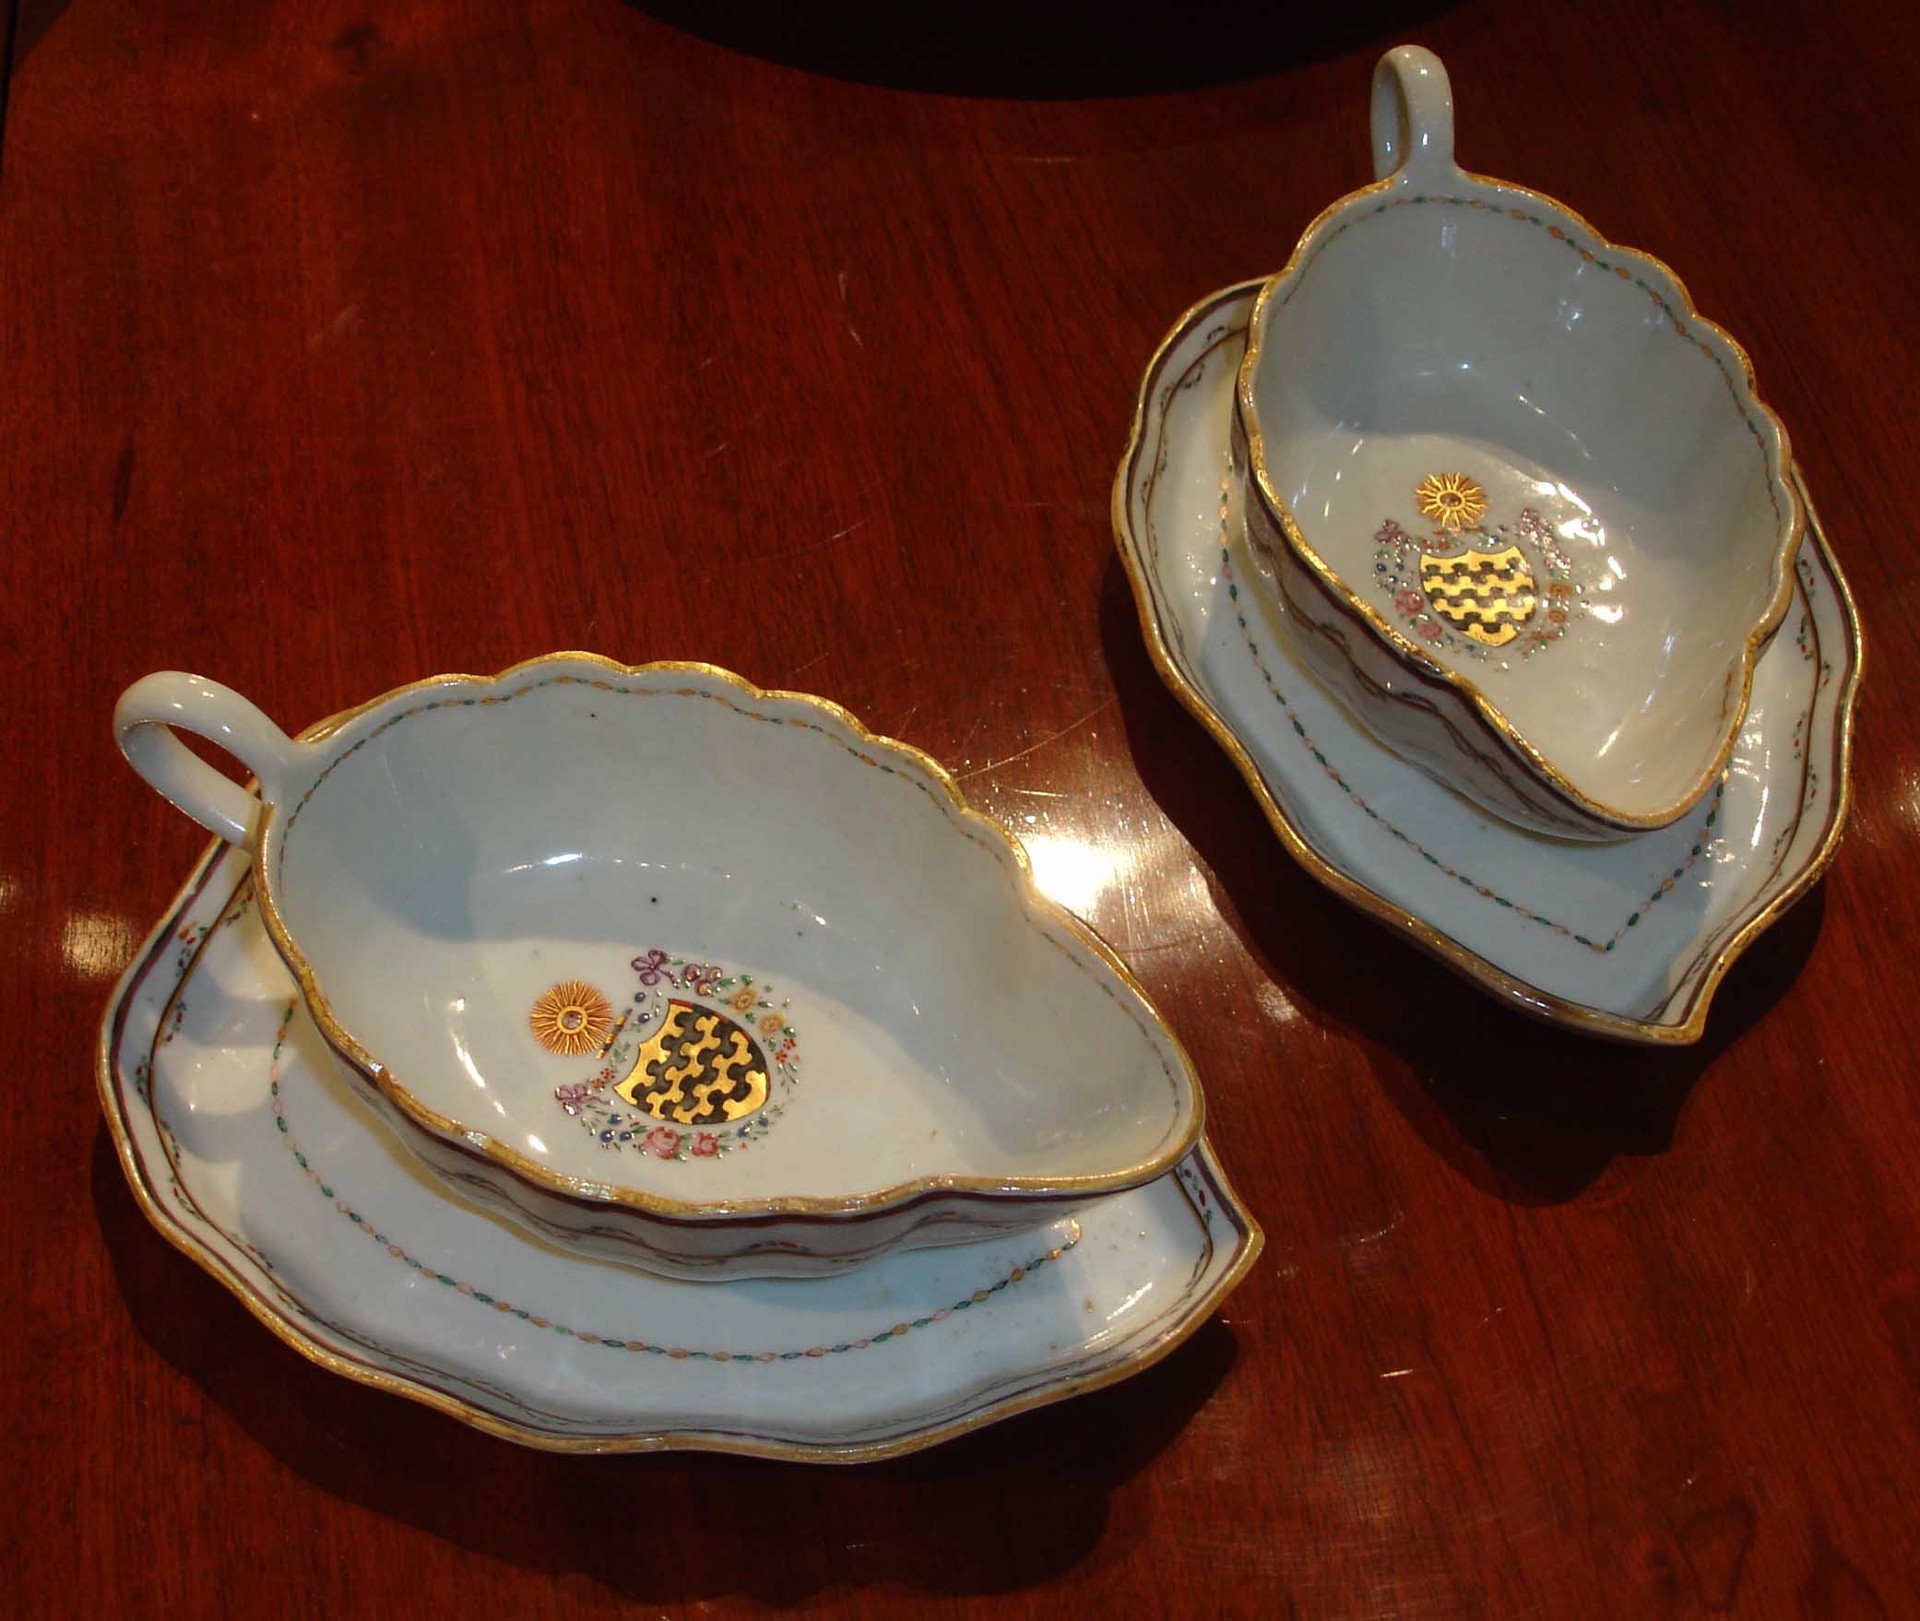 PAIR OF ARMORIAL GRAVY BOATS ON STANDS WITH ARMS OF BLUNT